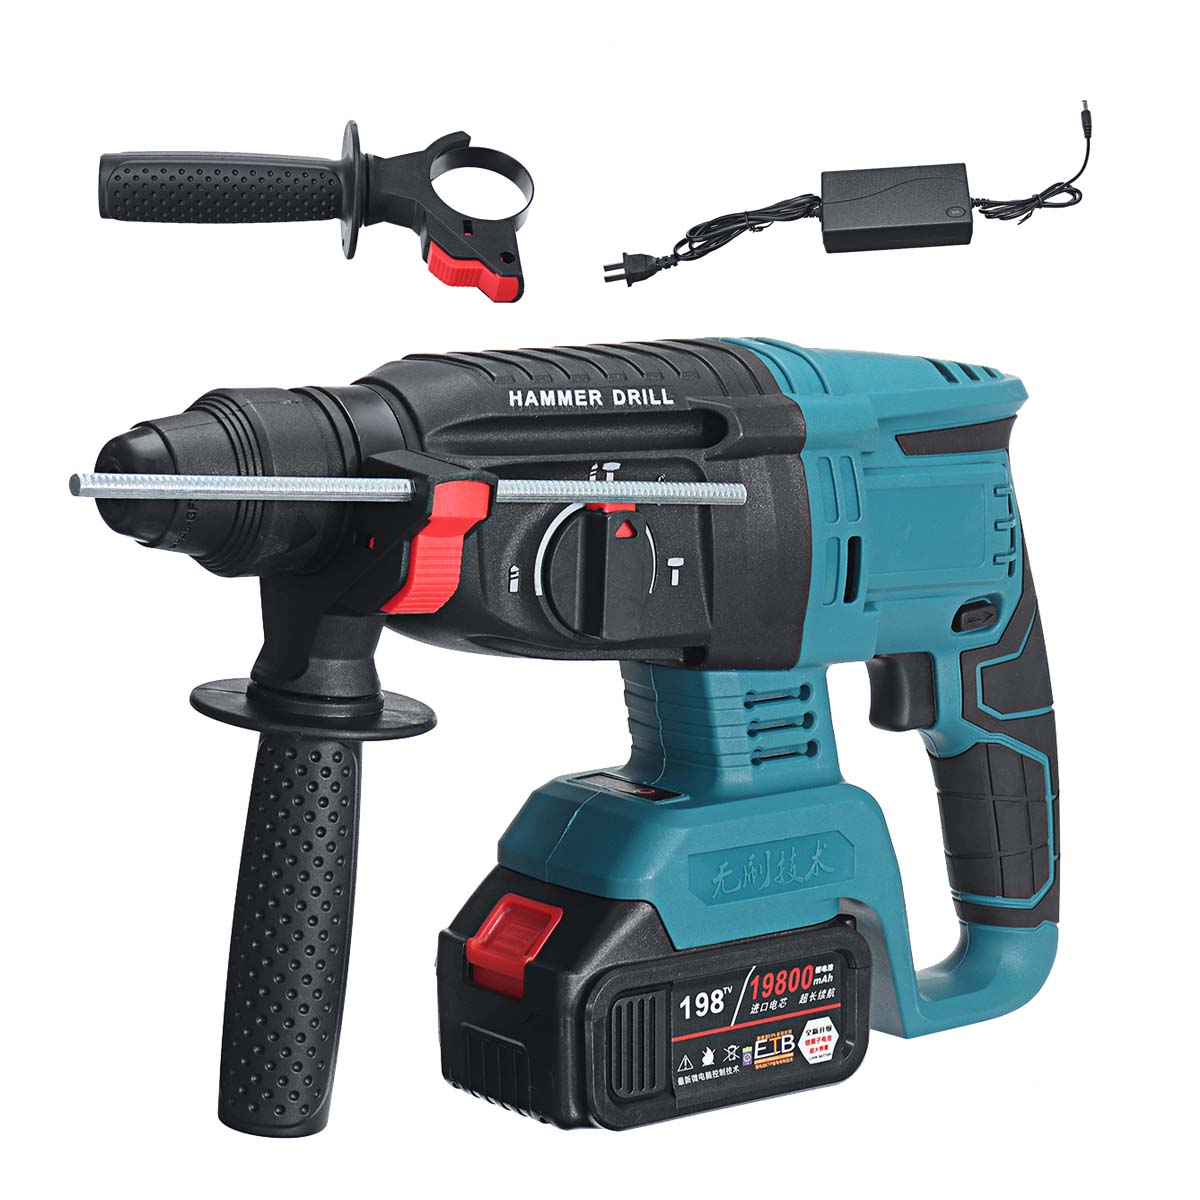 100-240V-21V-Brushless-Electric-Hammer-Heavy-Duty-Electric-Rotary-Hammer-Drill-No-load-Speed-Tool-1744302-10